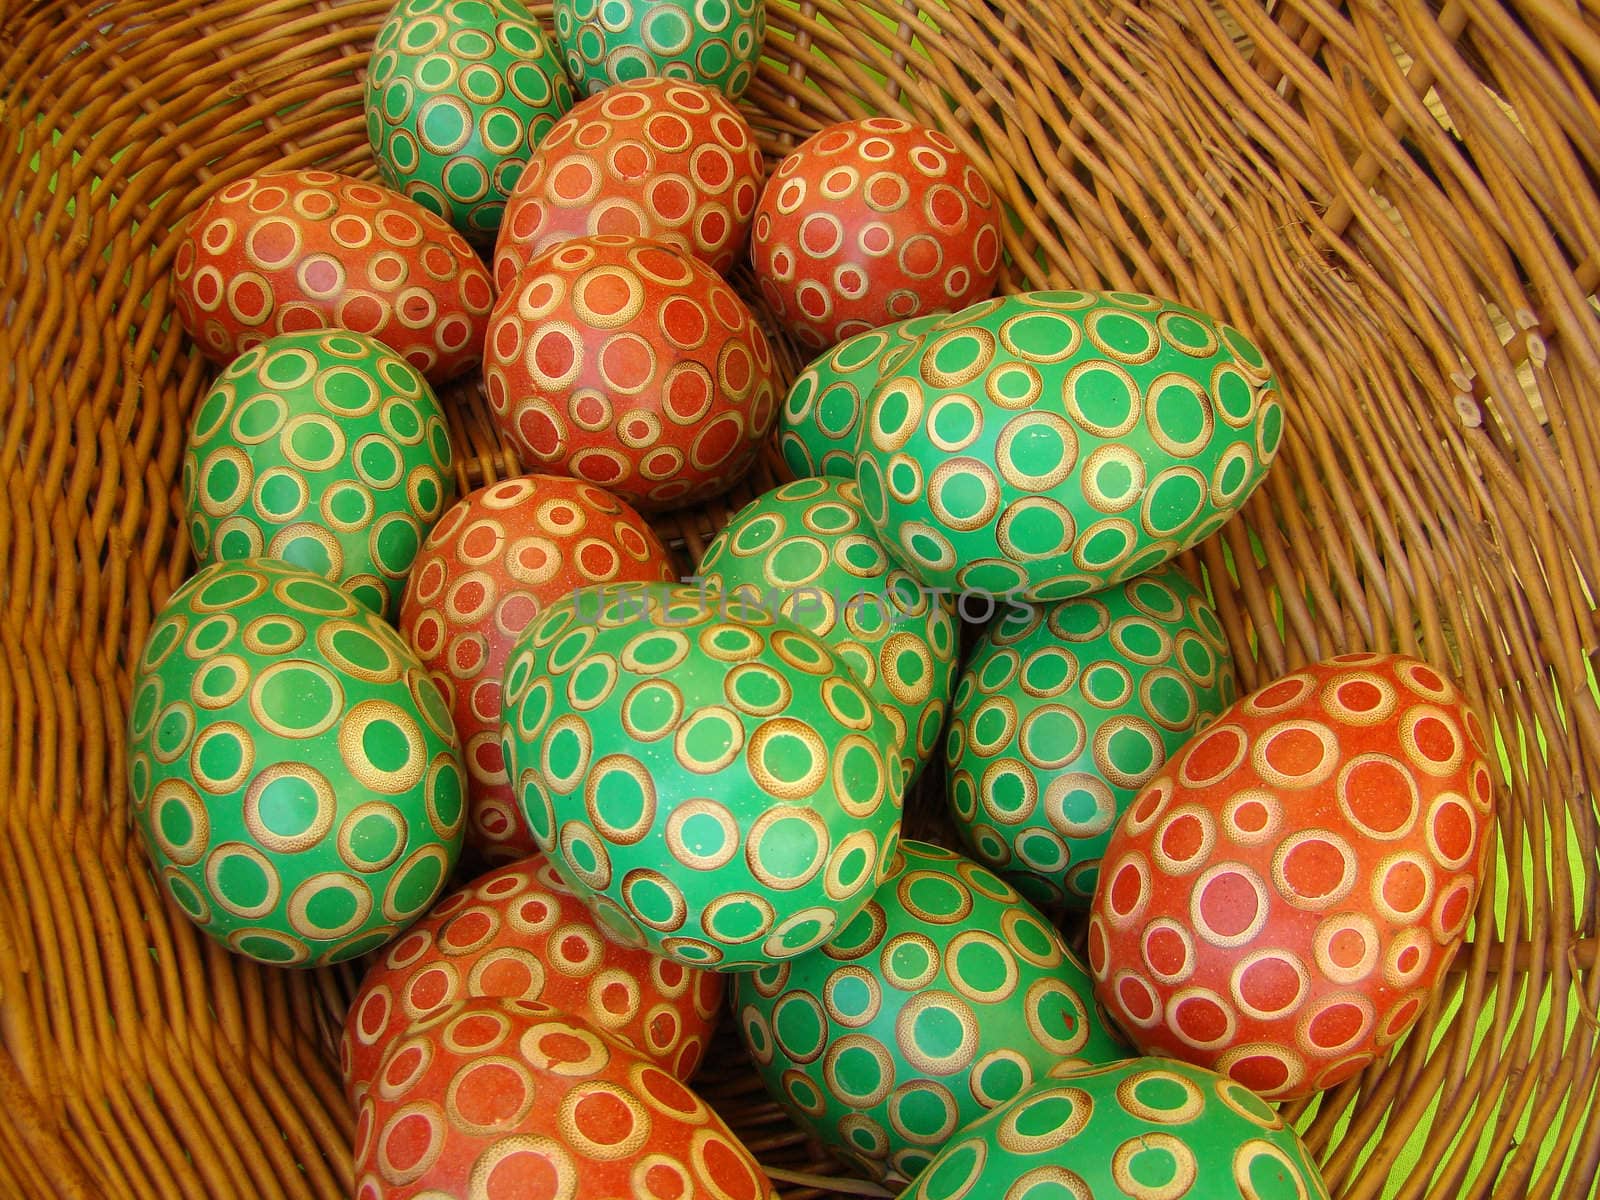 Bamboo Easter Eggs
from Indonesia. 2009